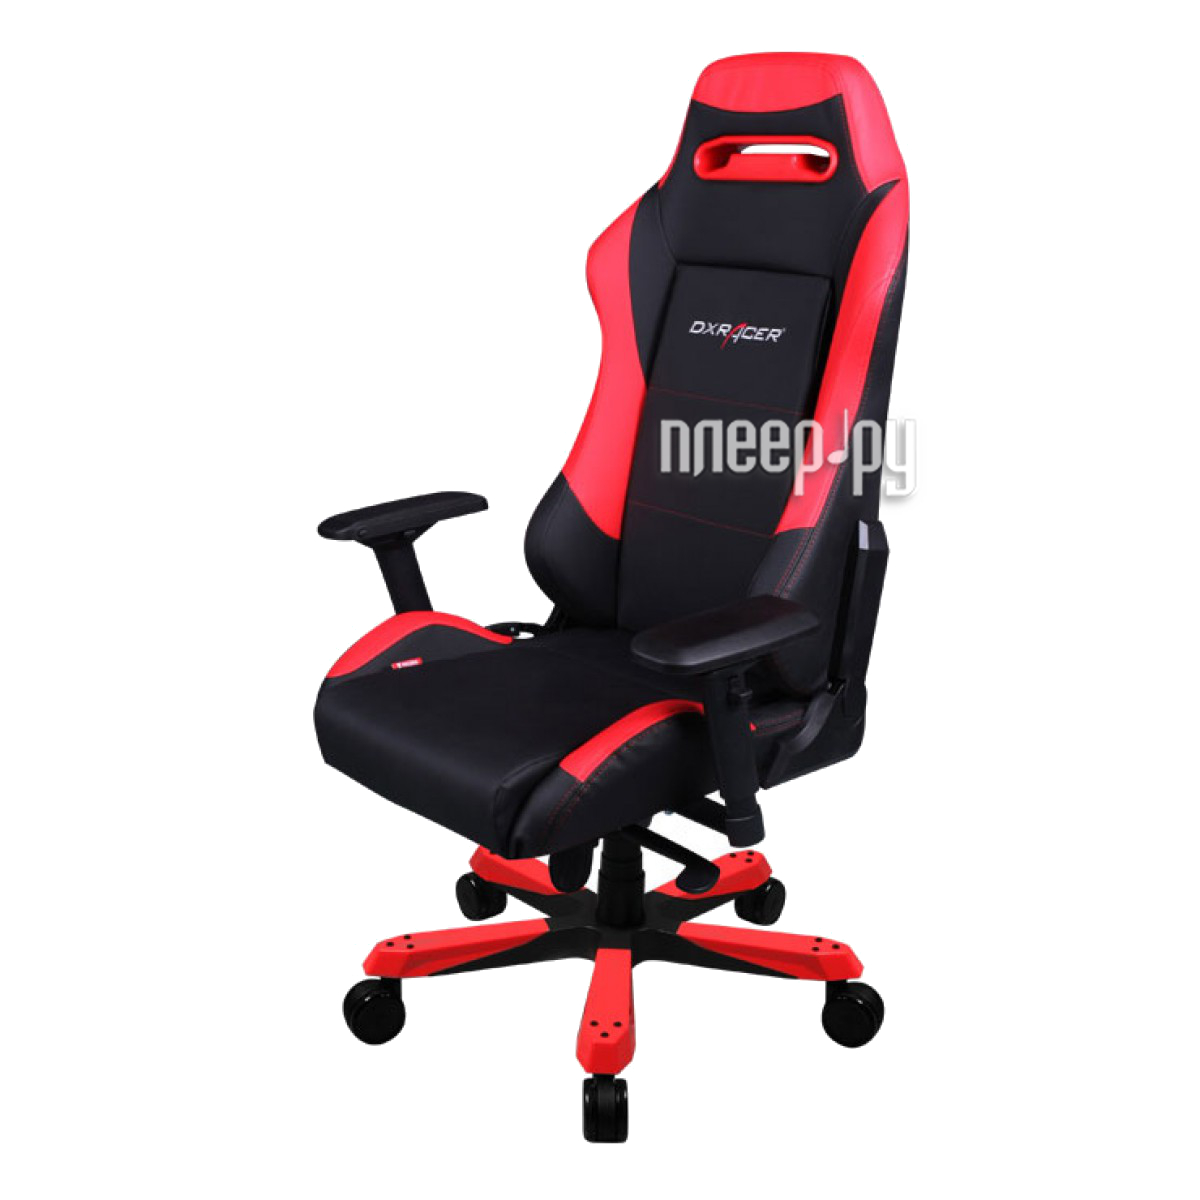   DXRacer OH / IS11 / NR 